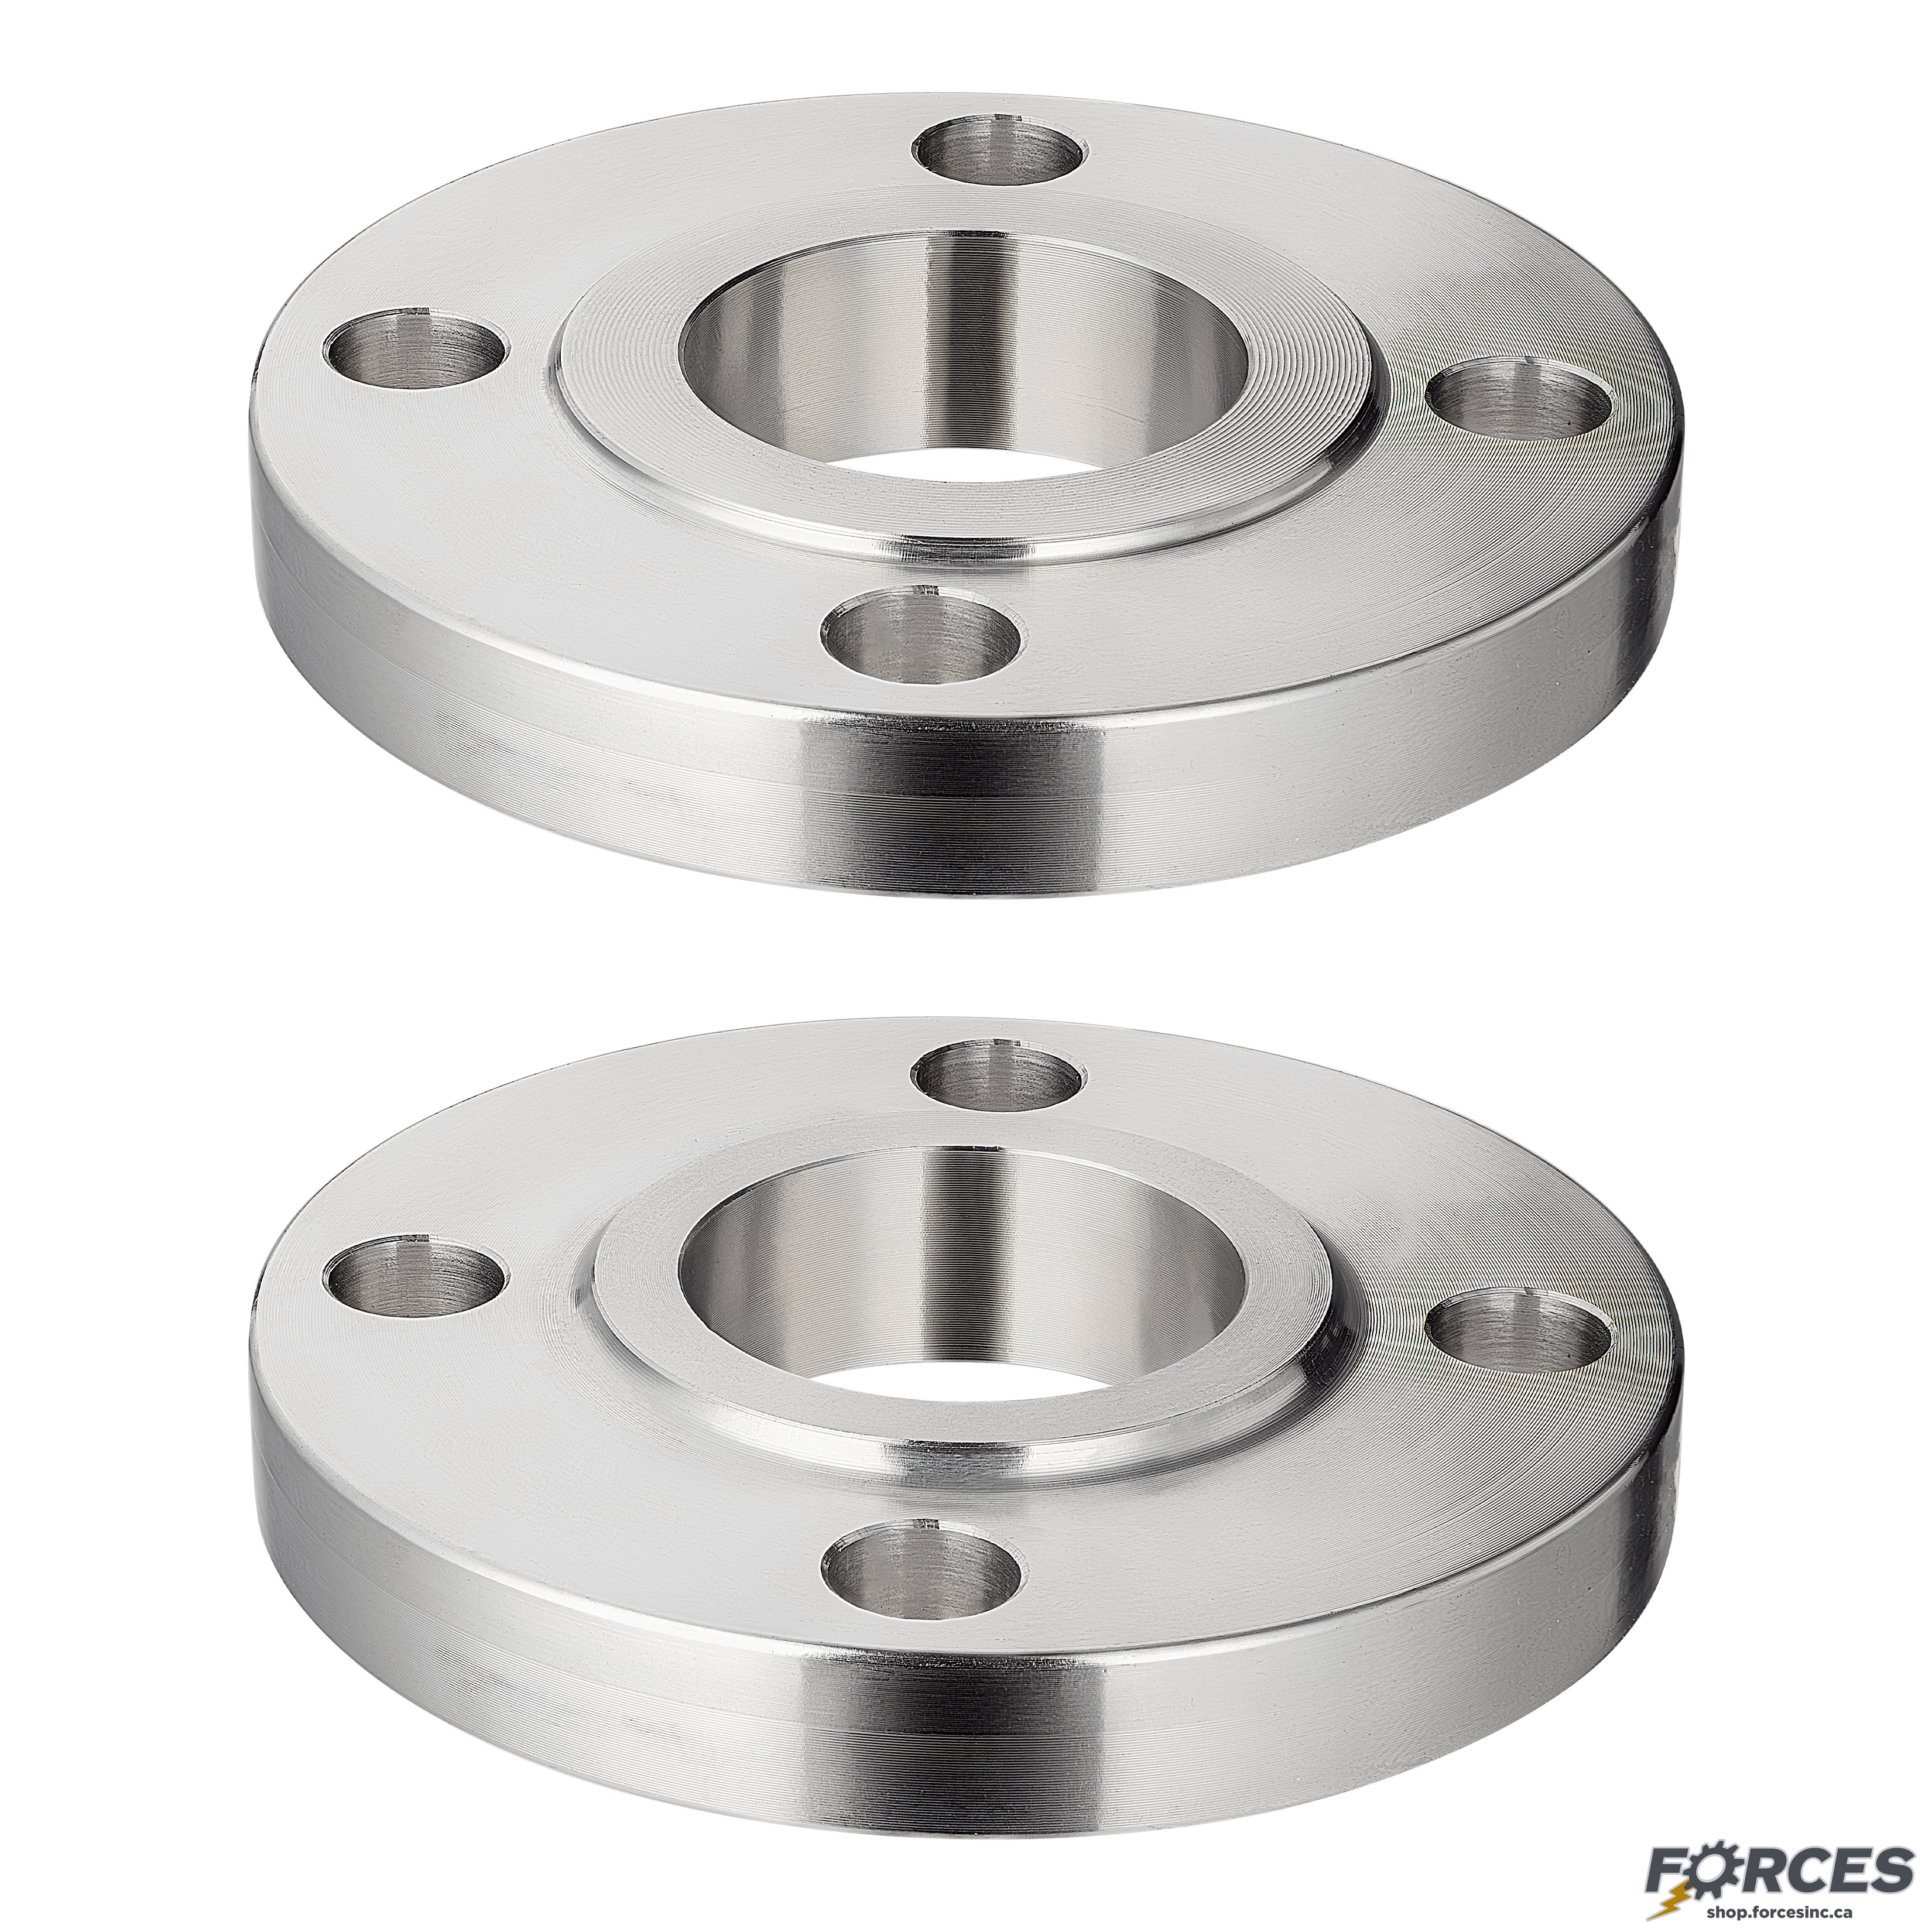 1-1/2" Slip-On Flange Class #150 - Stainless Steel 316 - Forces Inc